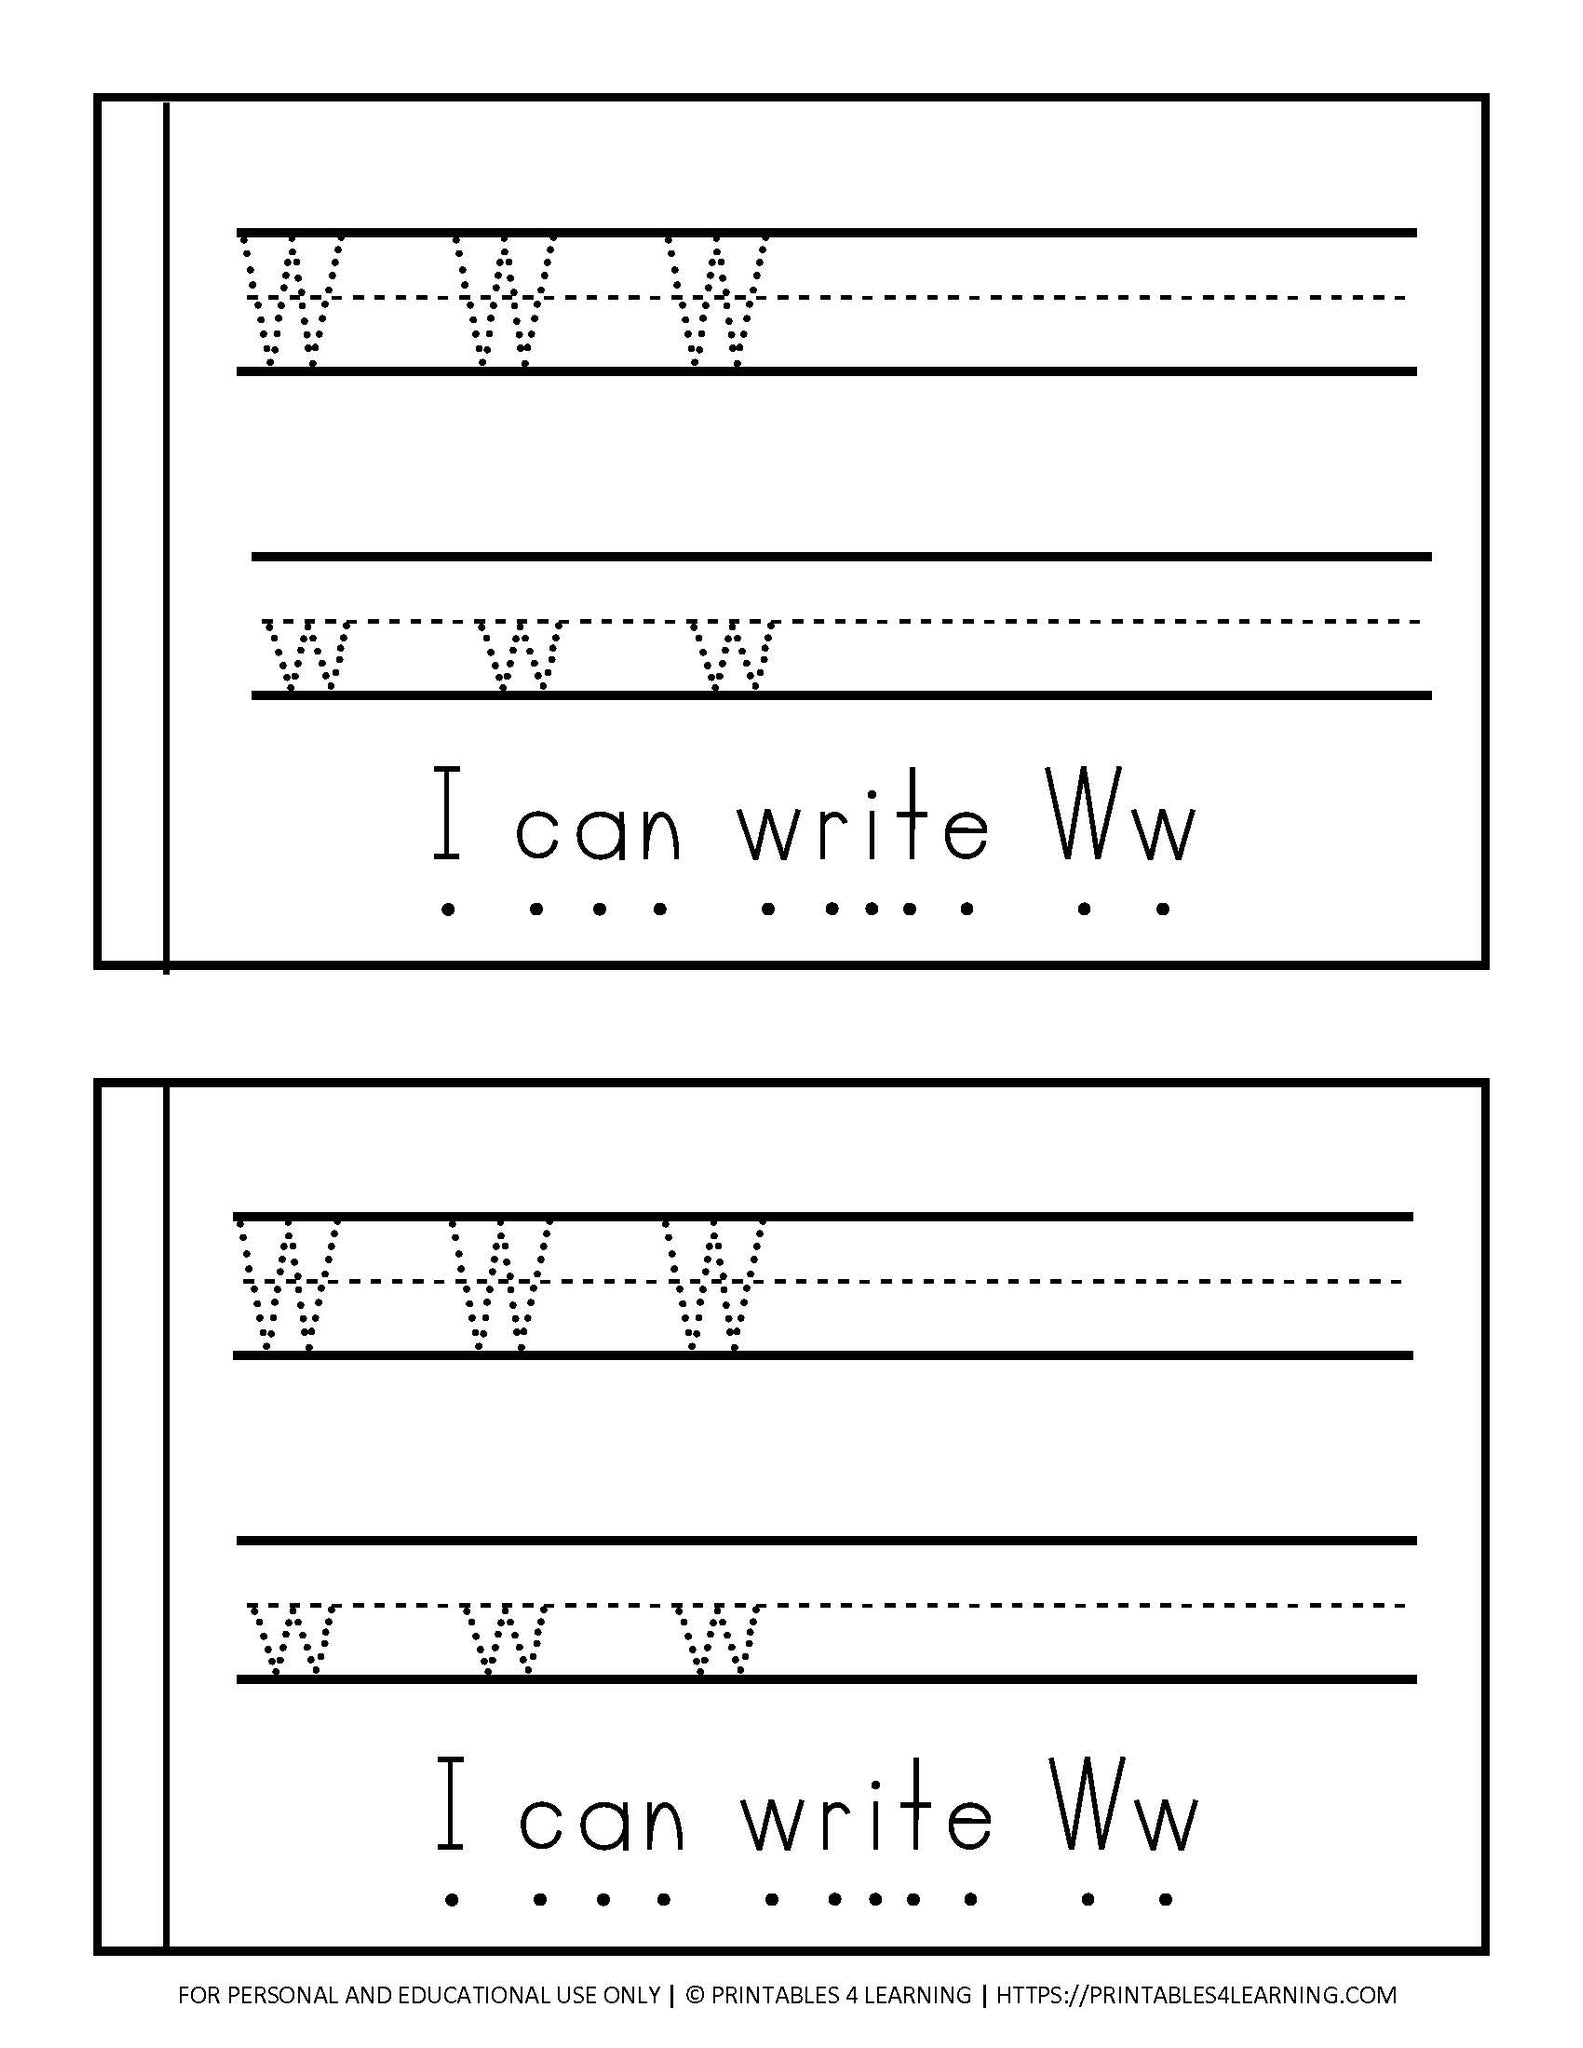 Letter w emergent reader coloring book â printables learning